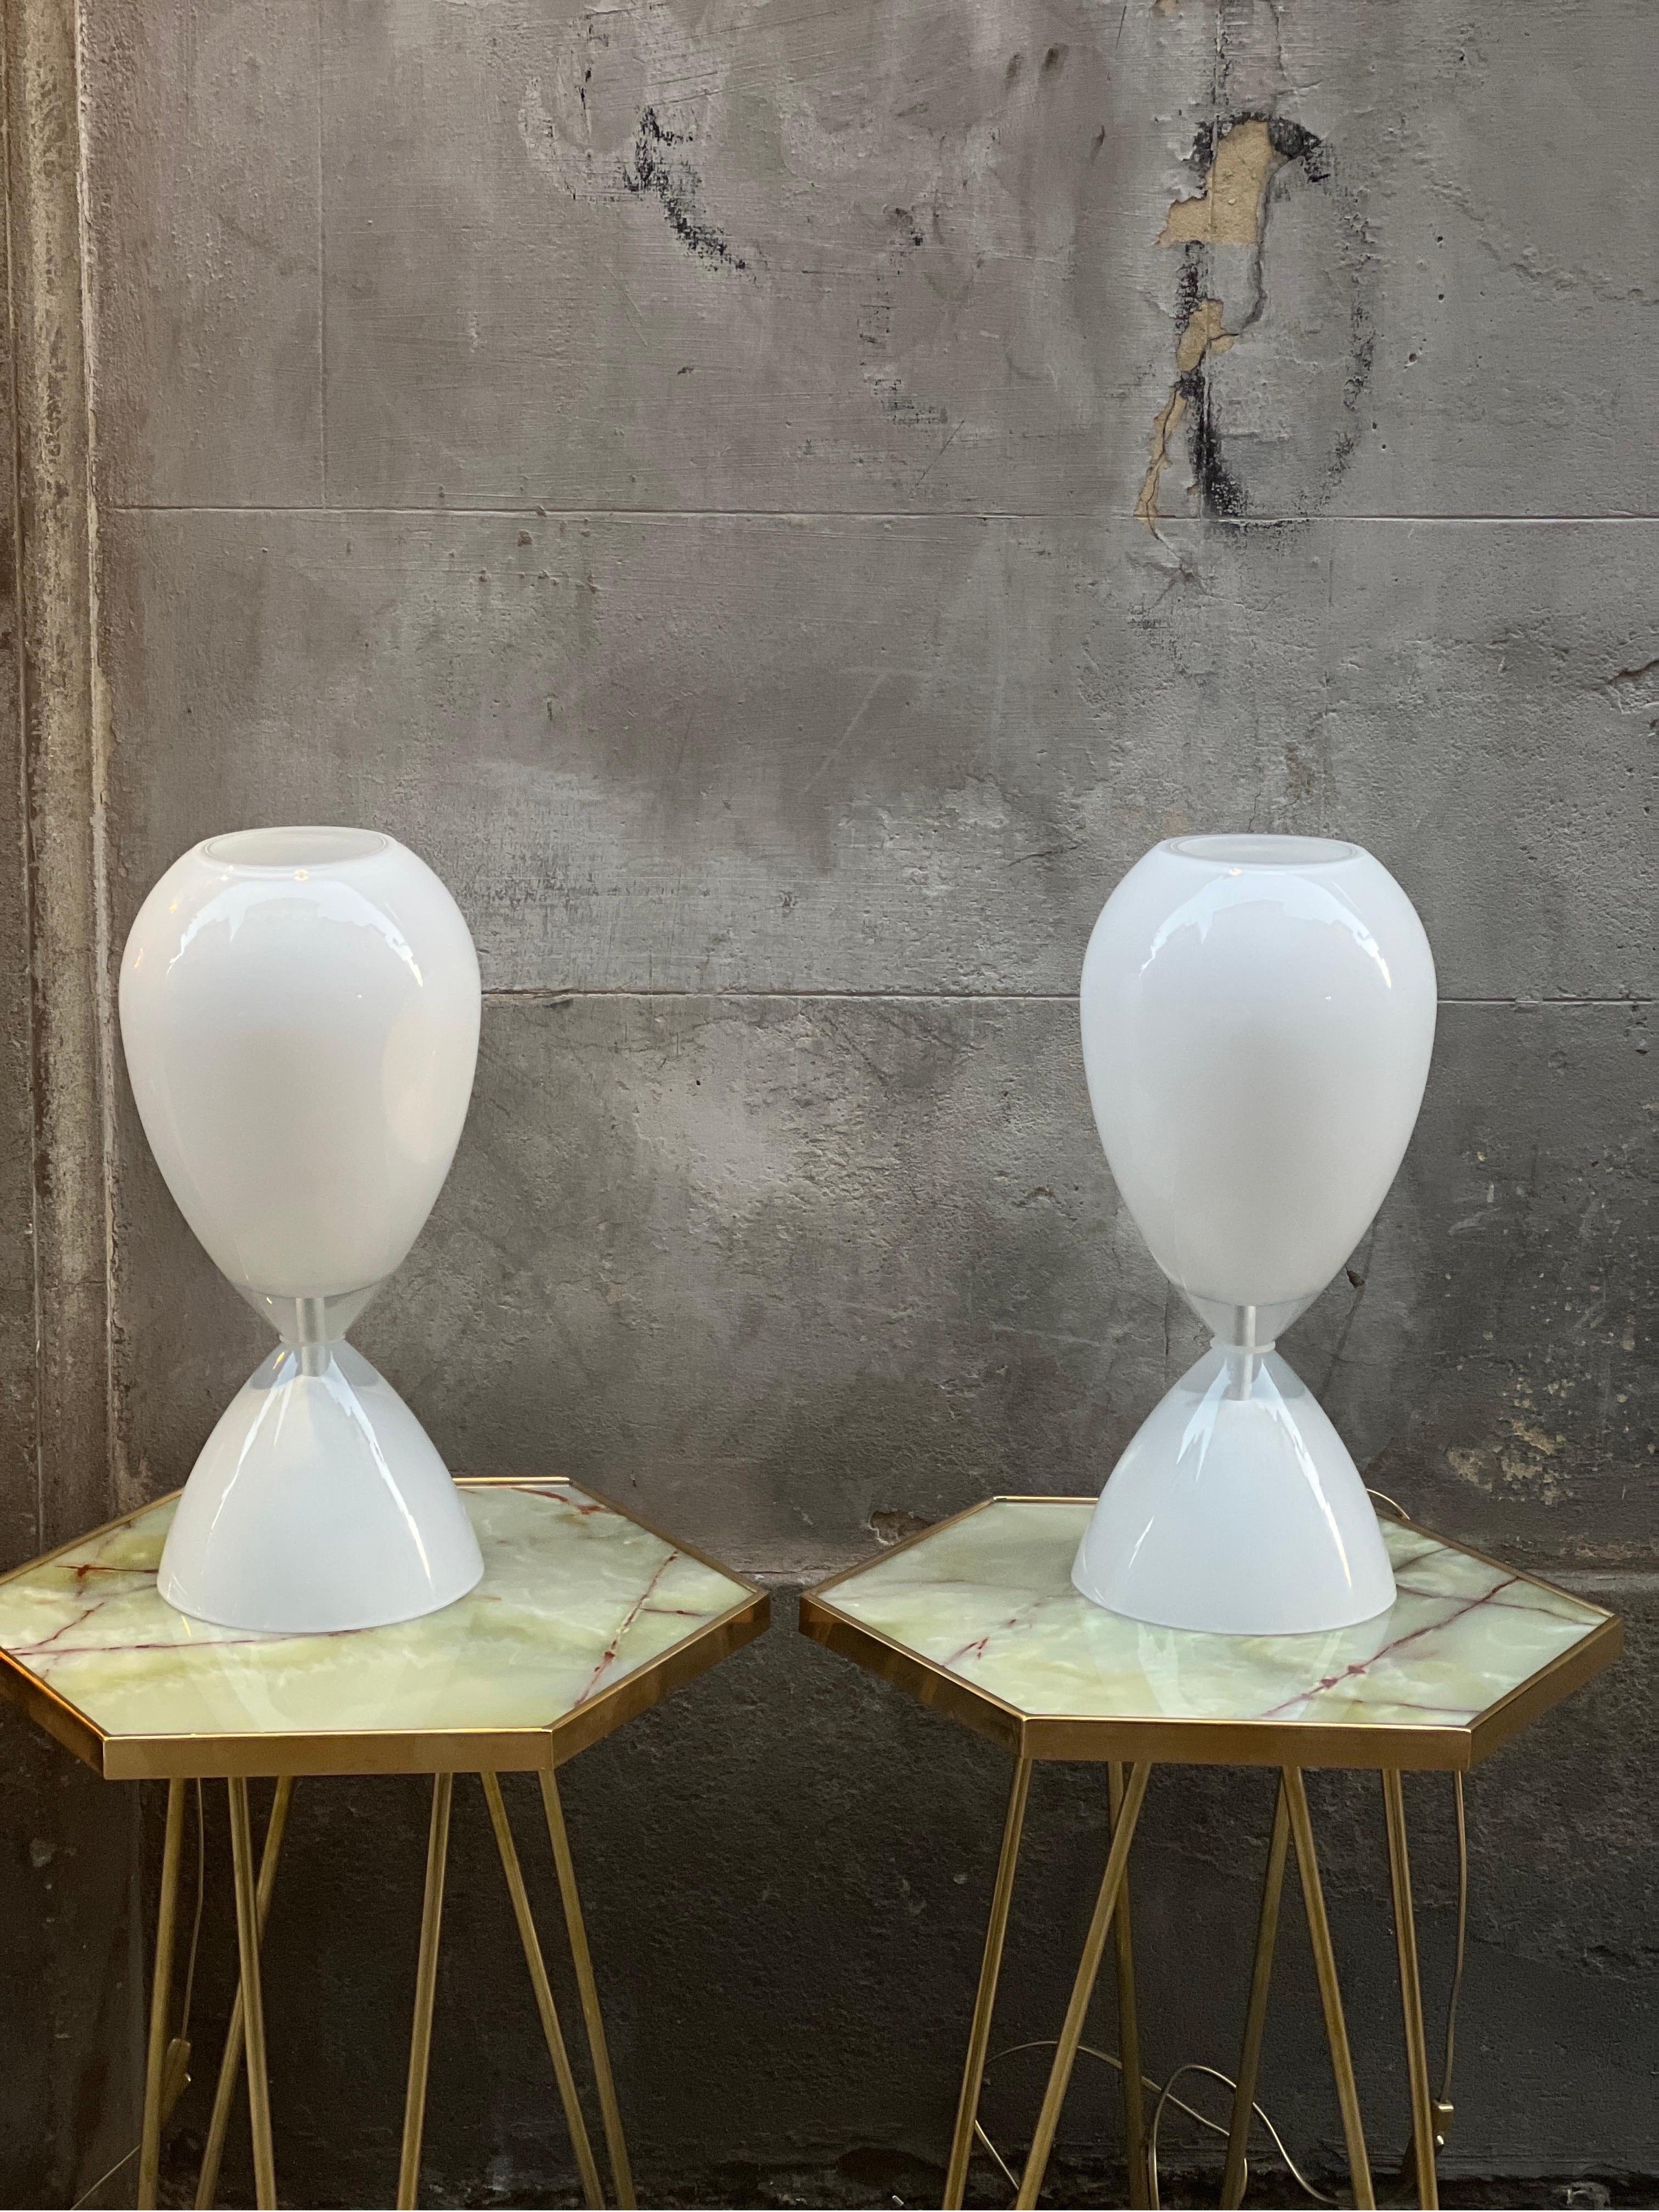 Pair of white hourglass shaped Murano Glass table lamps. 
Italian Vintage design midcentury era.
One bulb each lamp.
Available a blue version.